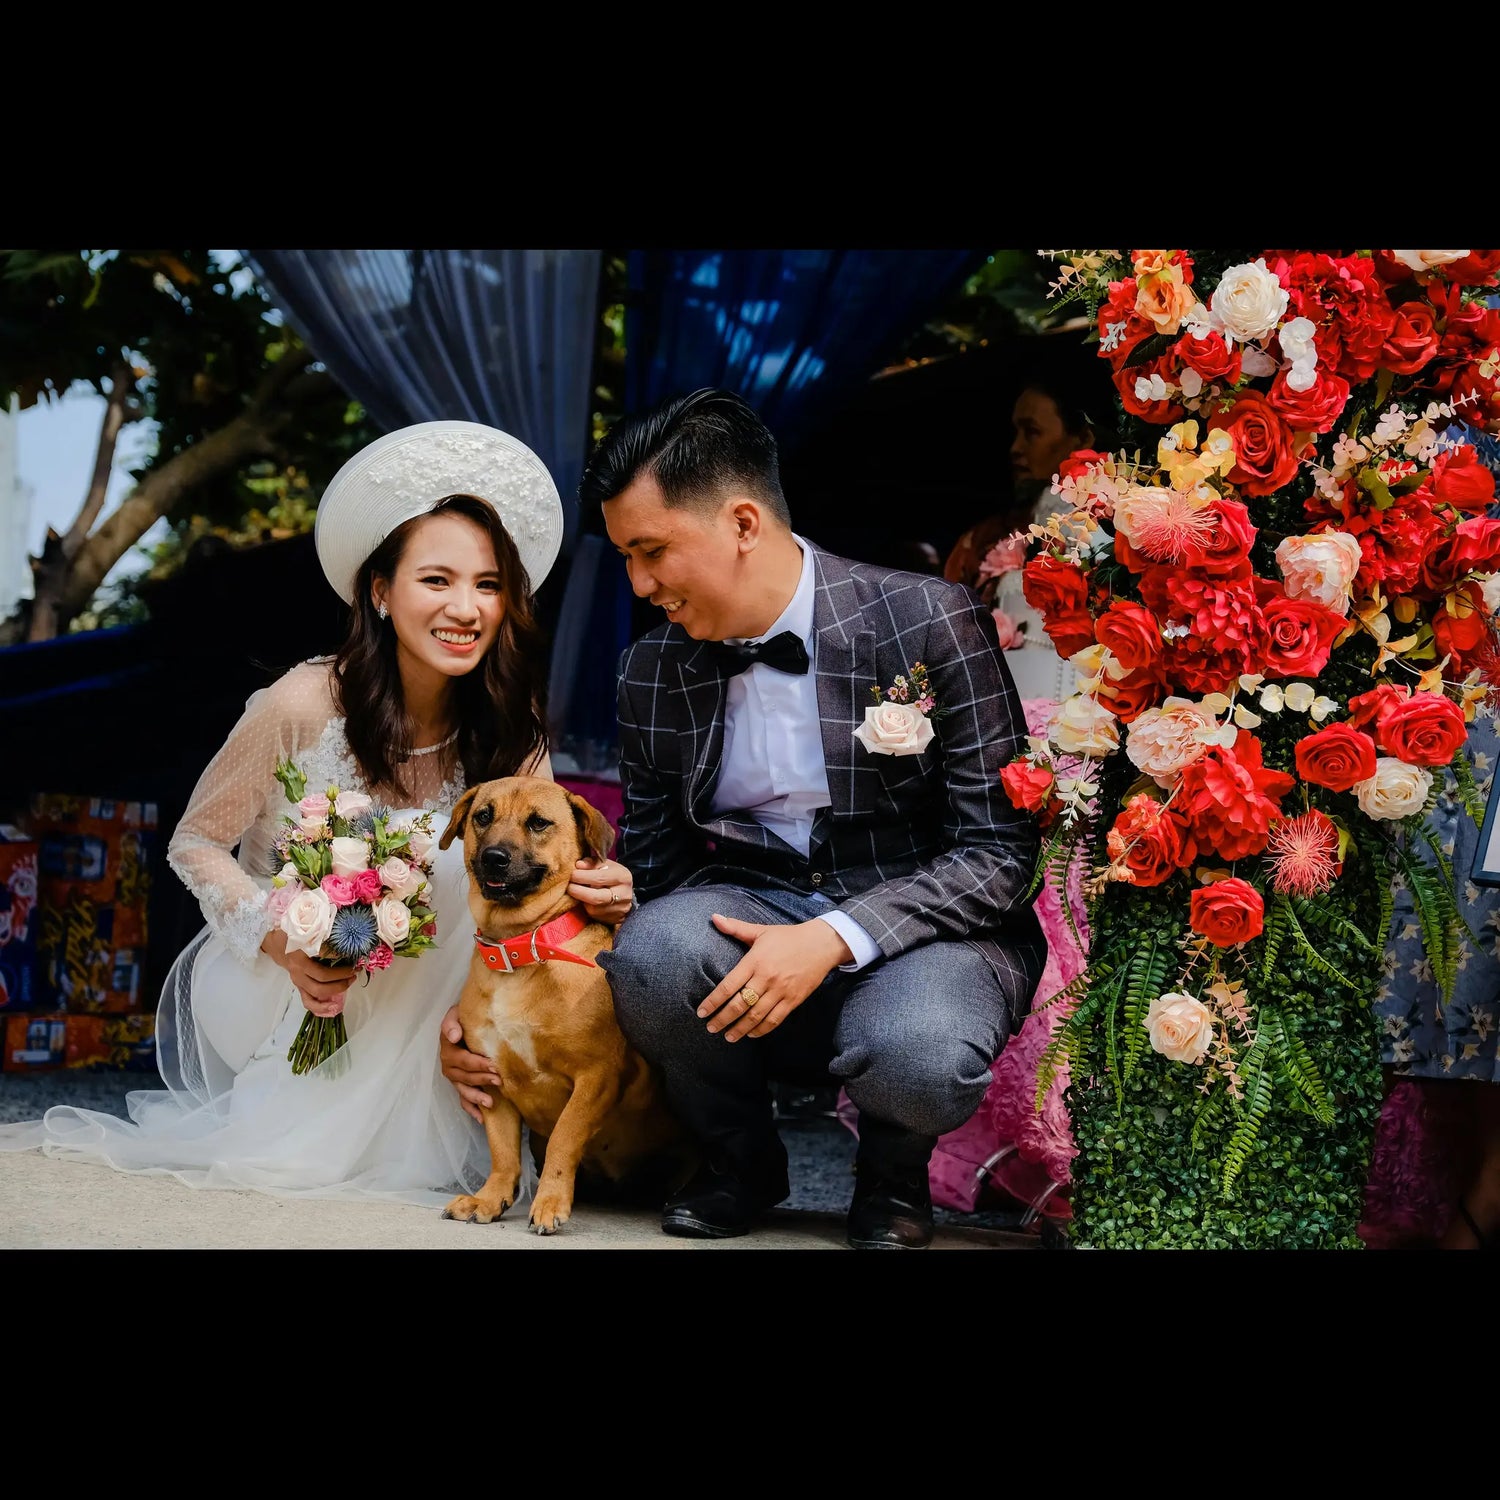 Training Tips for Your Dog's Wedding Debut